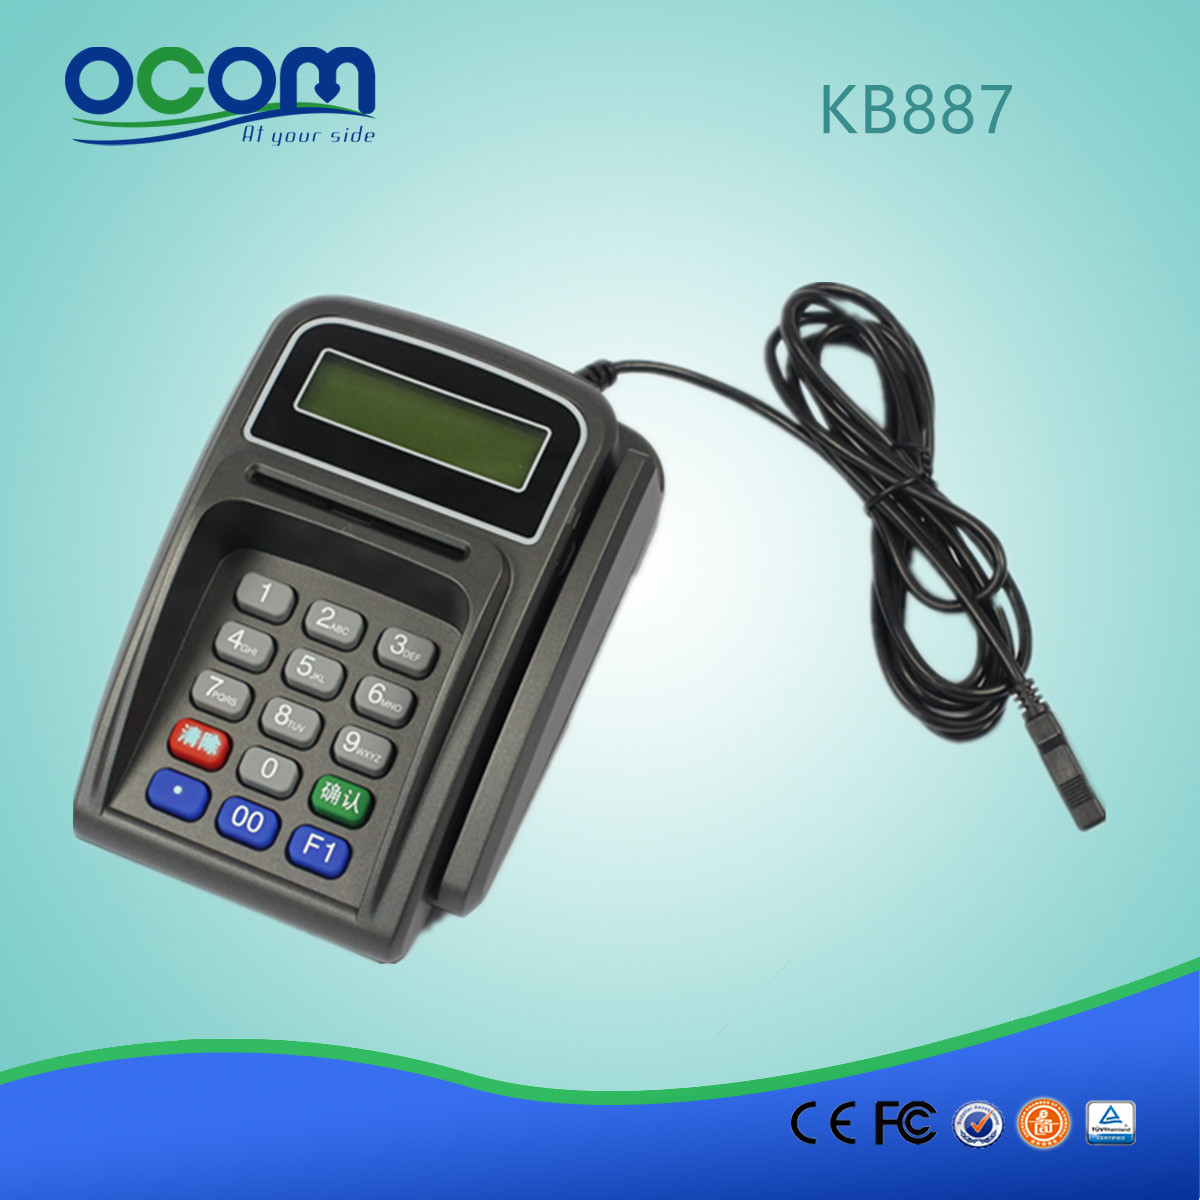 Mini Keypad with Smart Card Reader and Magnetic Card Reader KB887